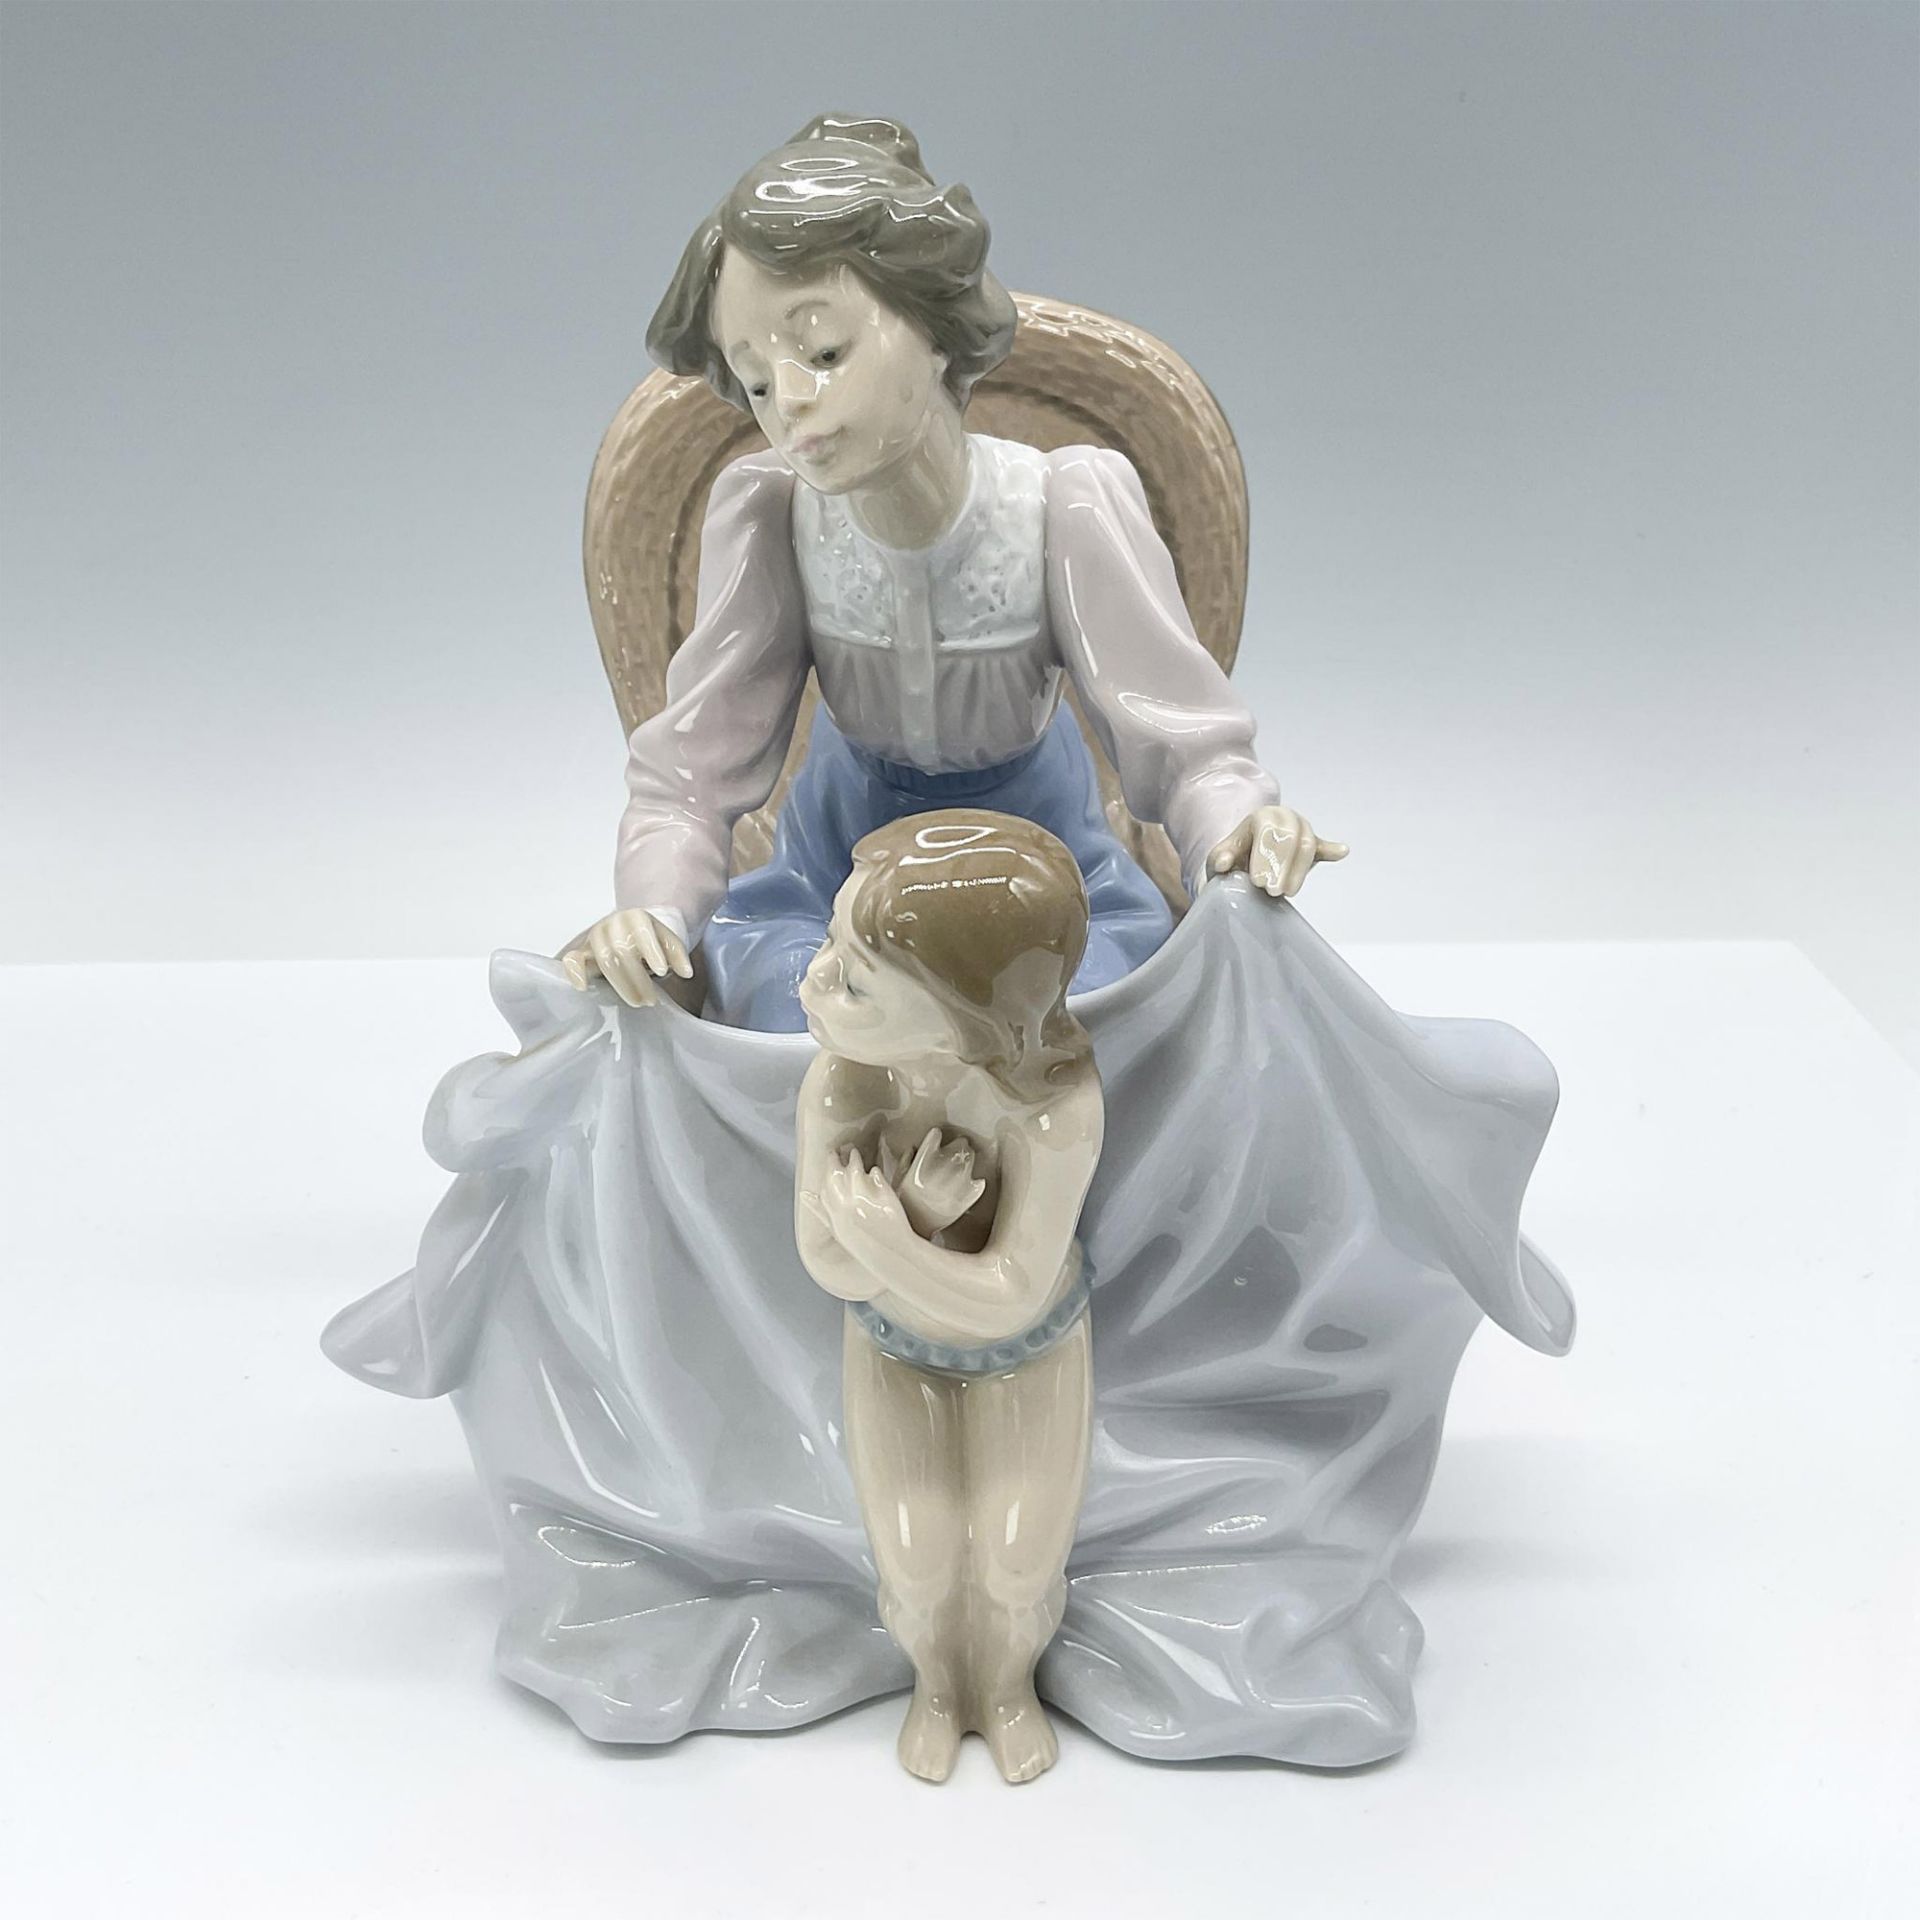 Mommy It's Cold 1005715 - Lladro Porcelain Figurine